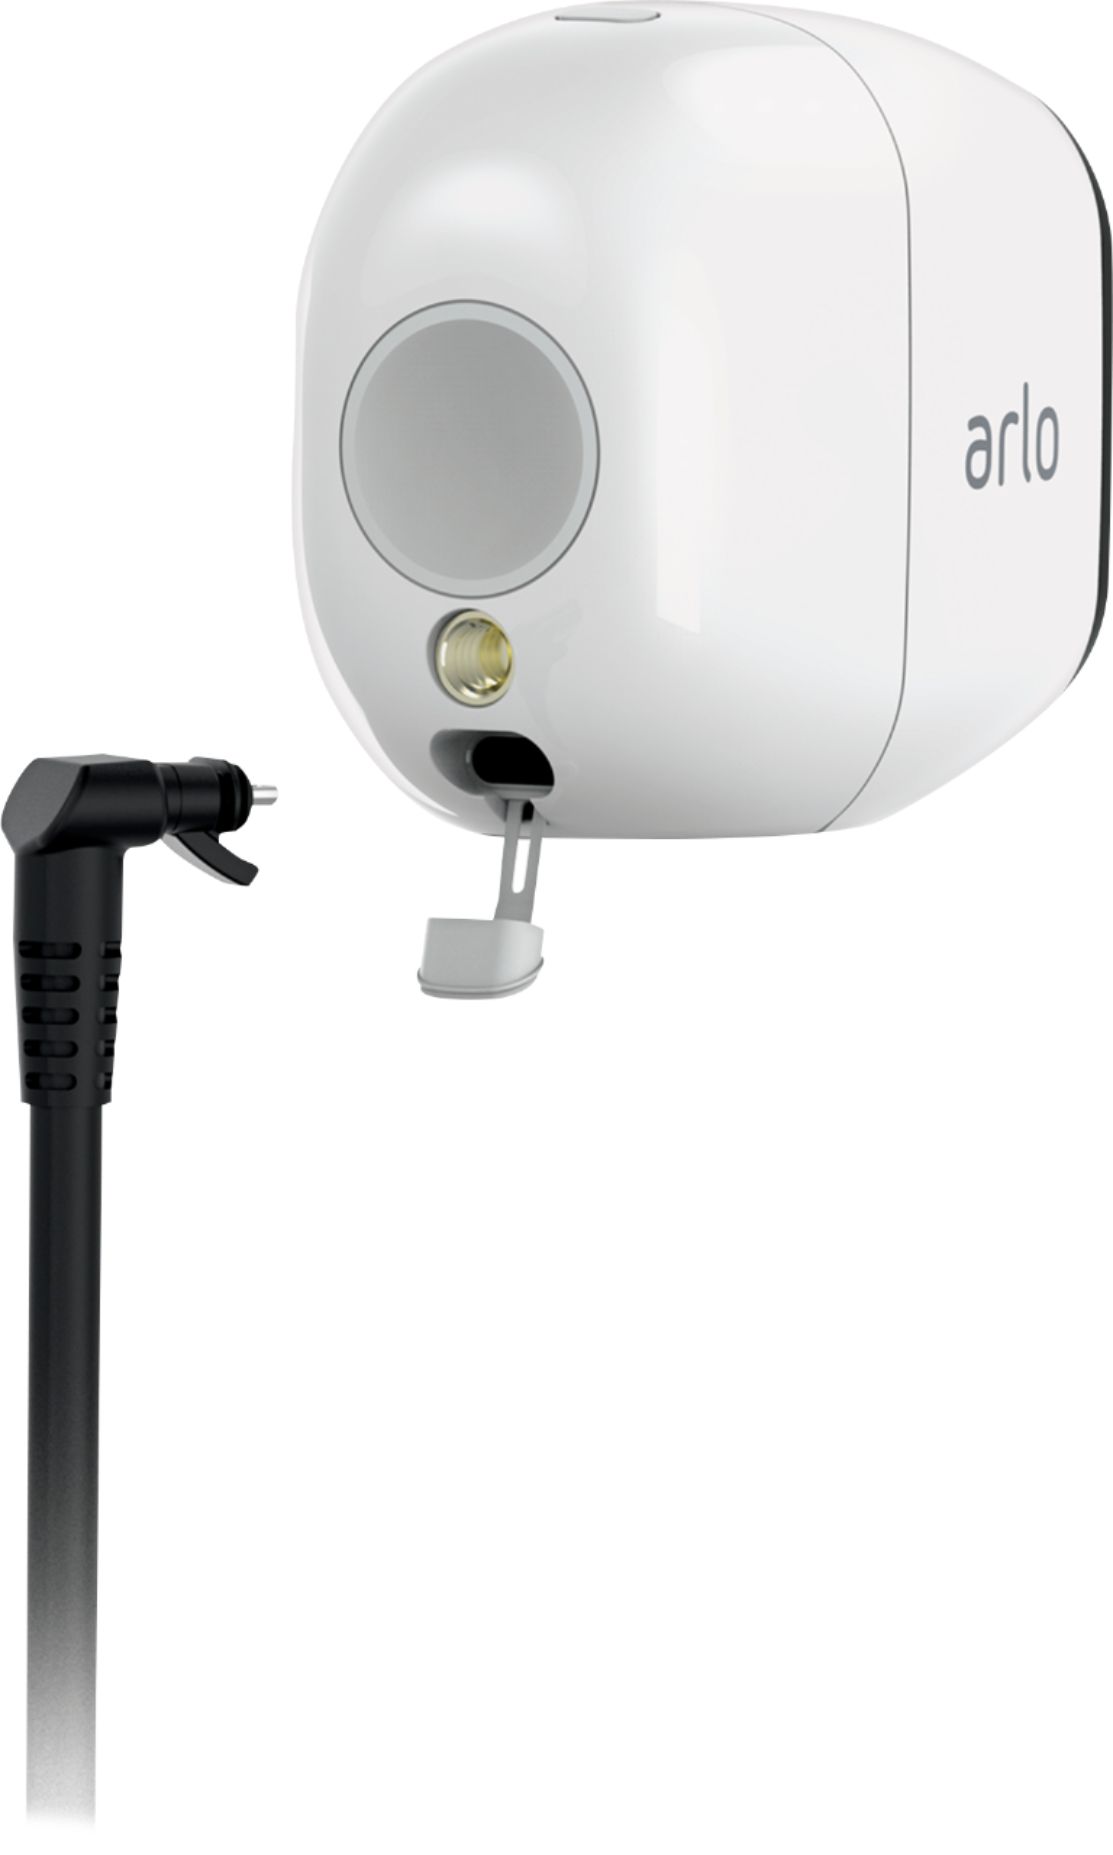 Outdoor Power Adapter for Arlo Pro, Pro 